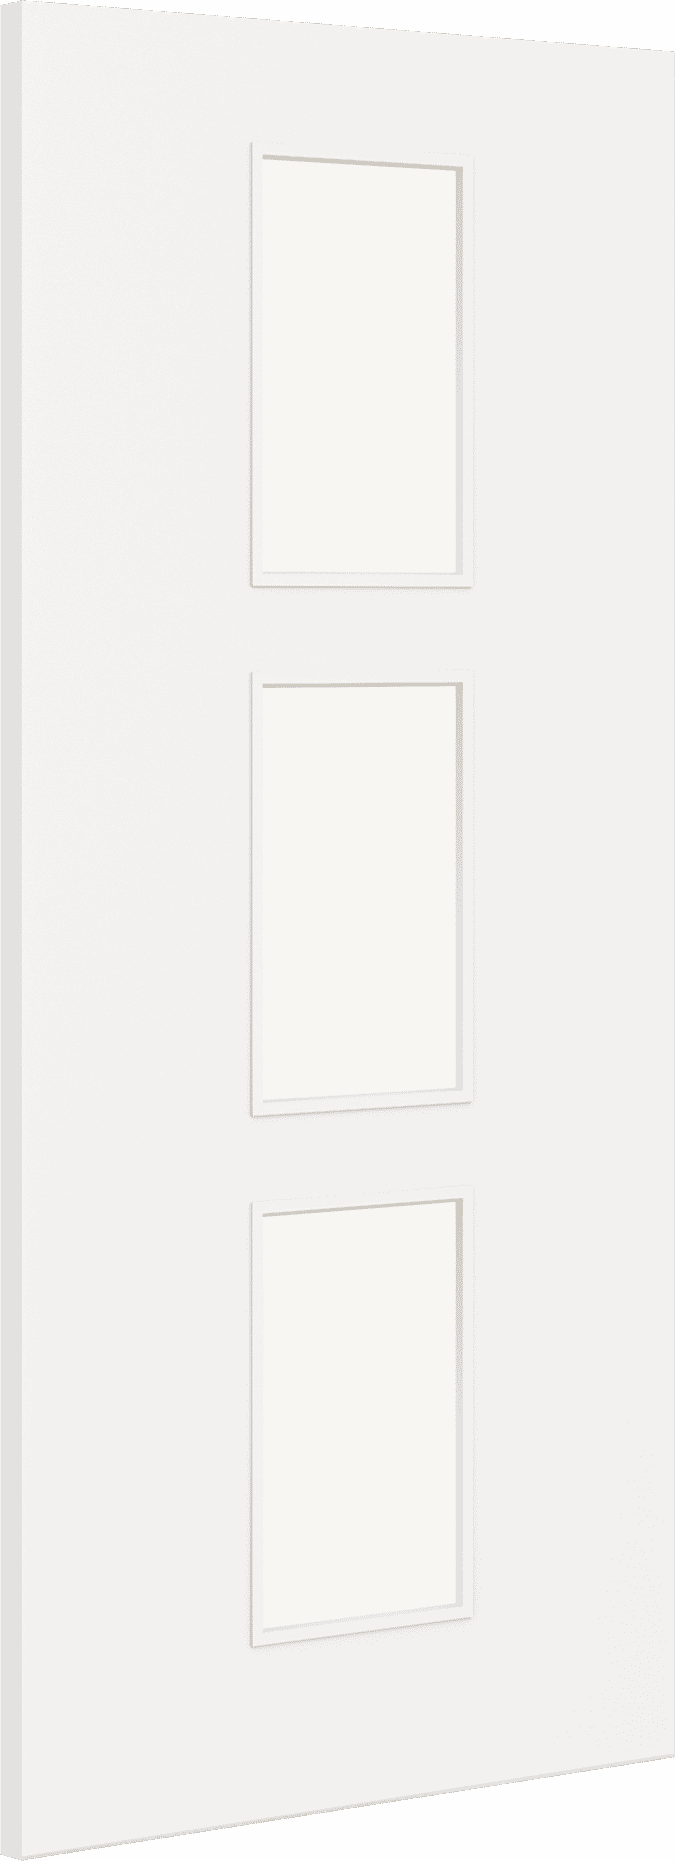 2040mm x 726mm x 44mm Architectural Paint Grade White 11 Frosted Glazed Fire Door Blank